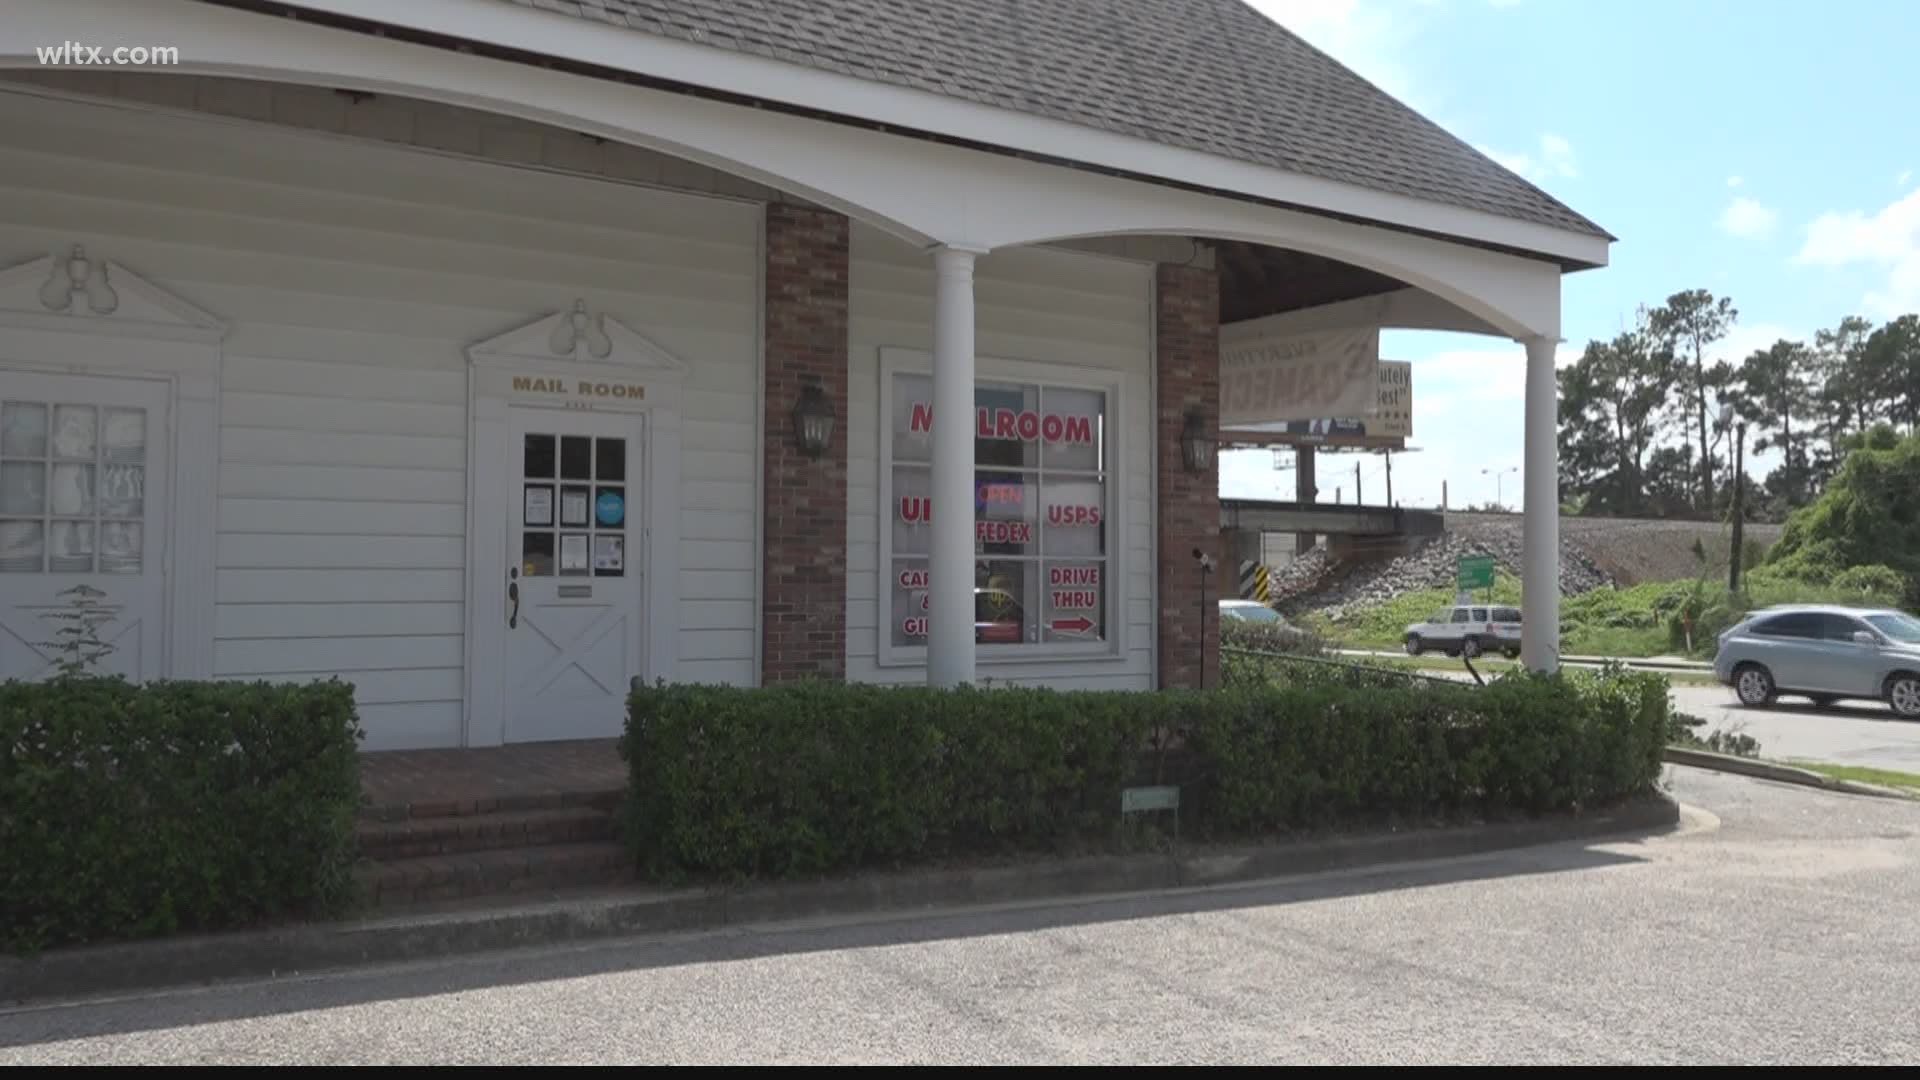 A Cayce business is feeling the effects of changes at the USPS